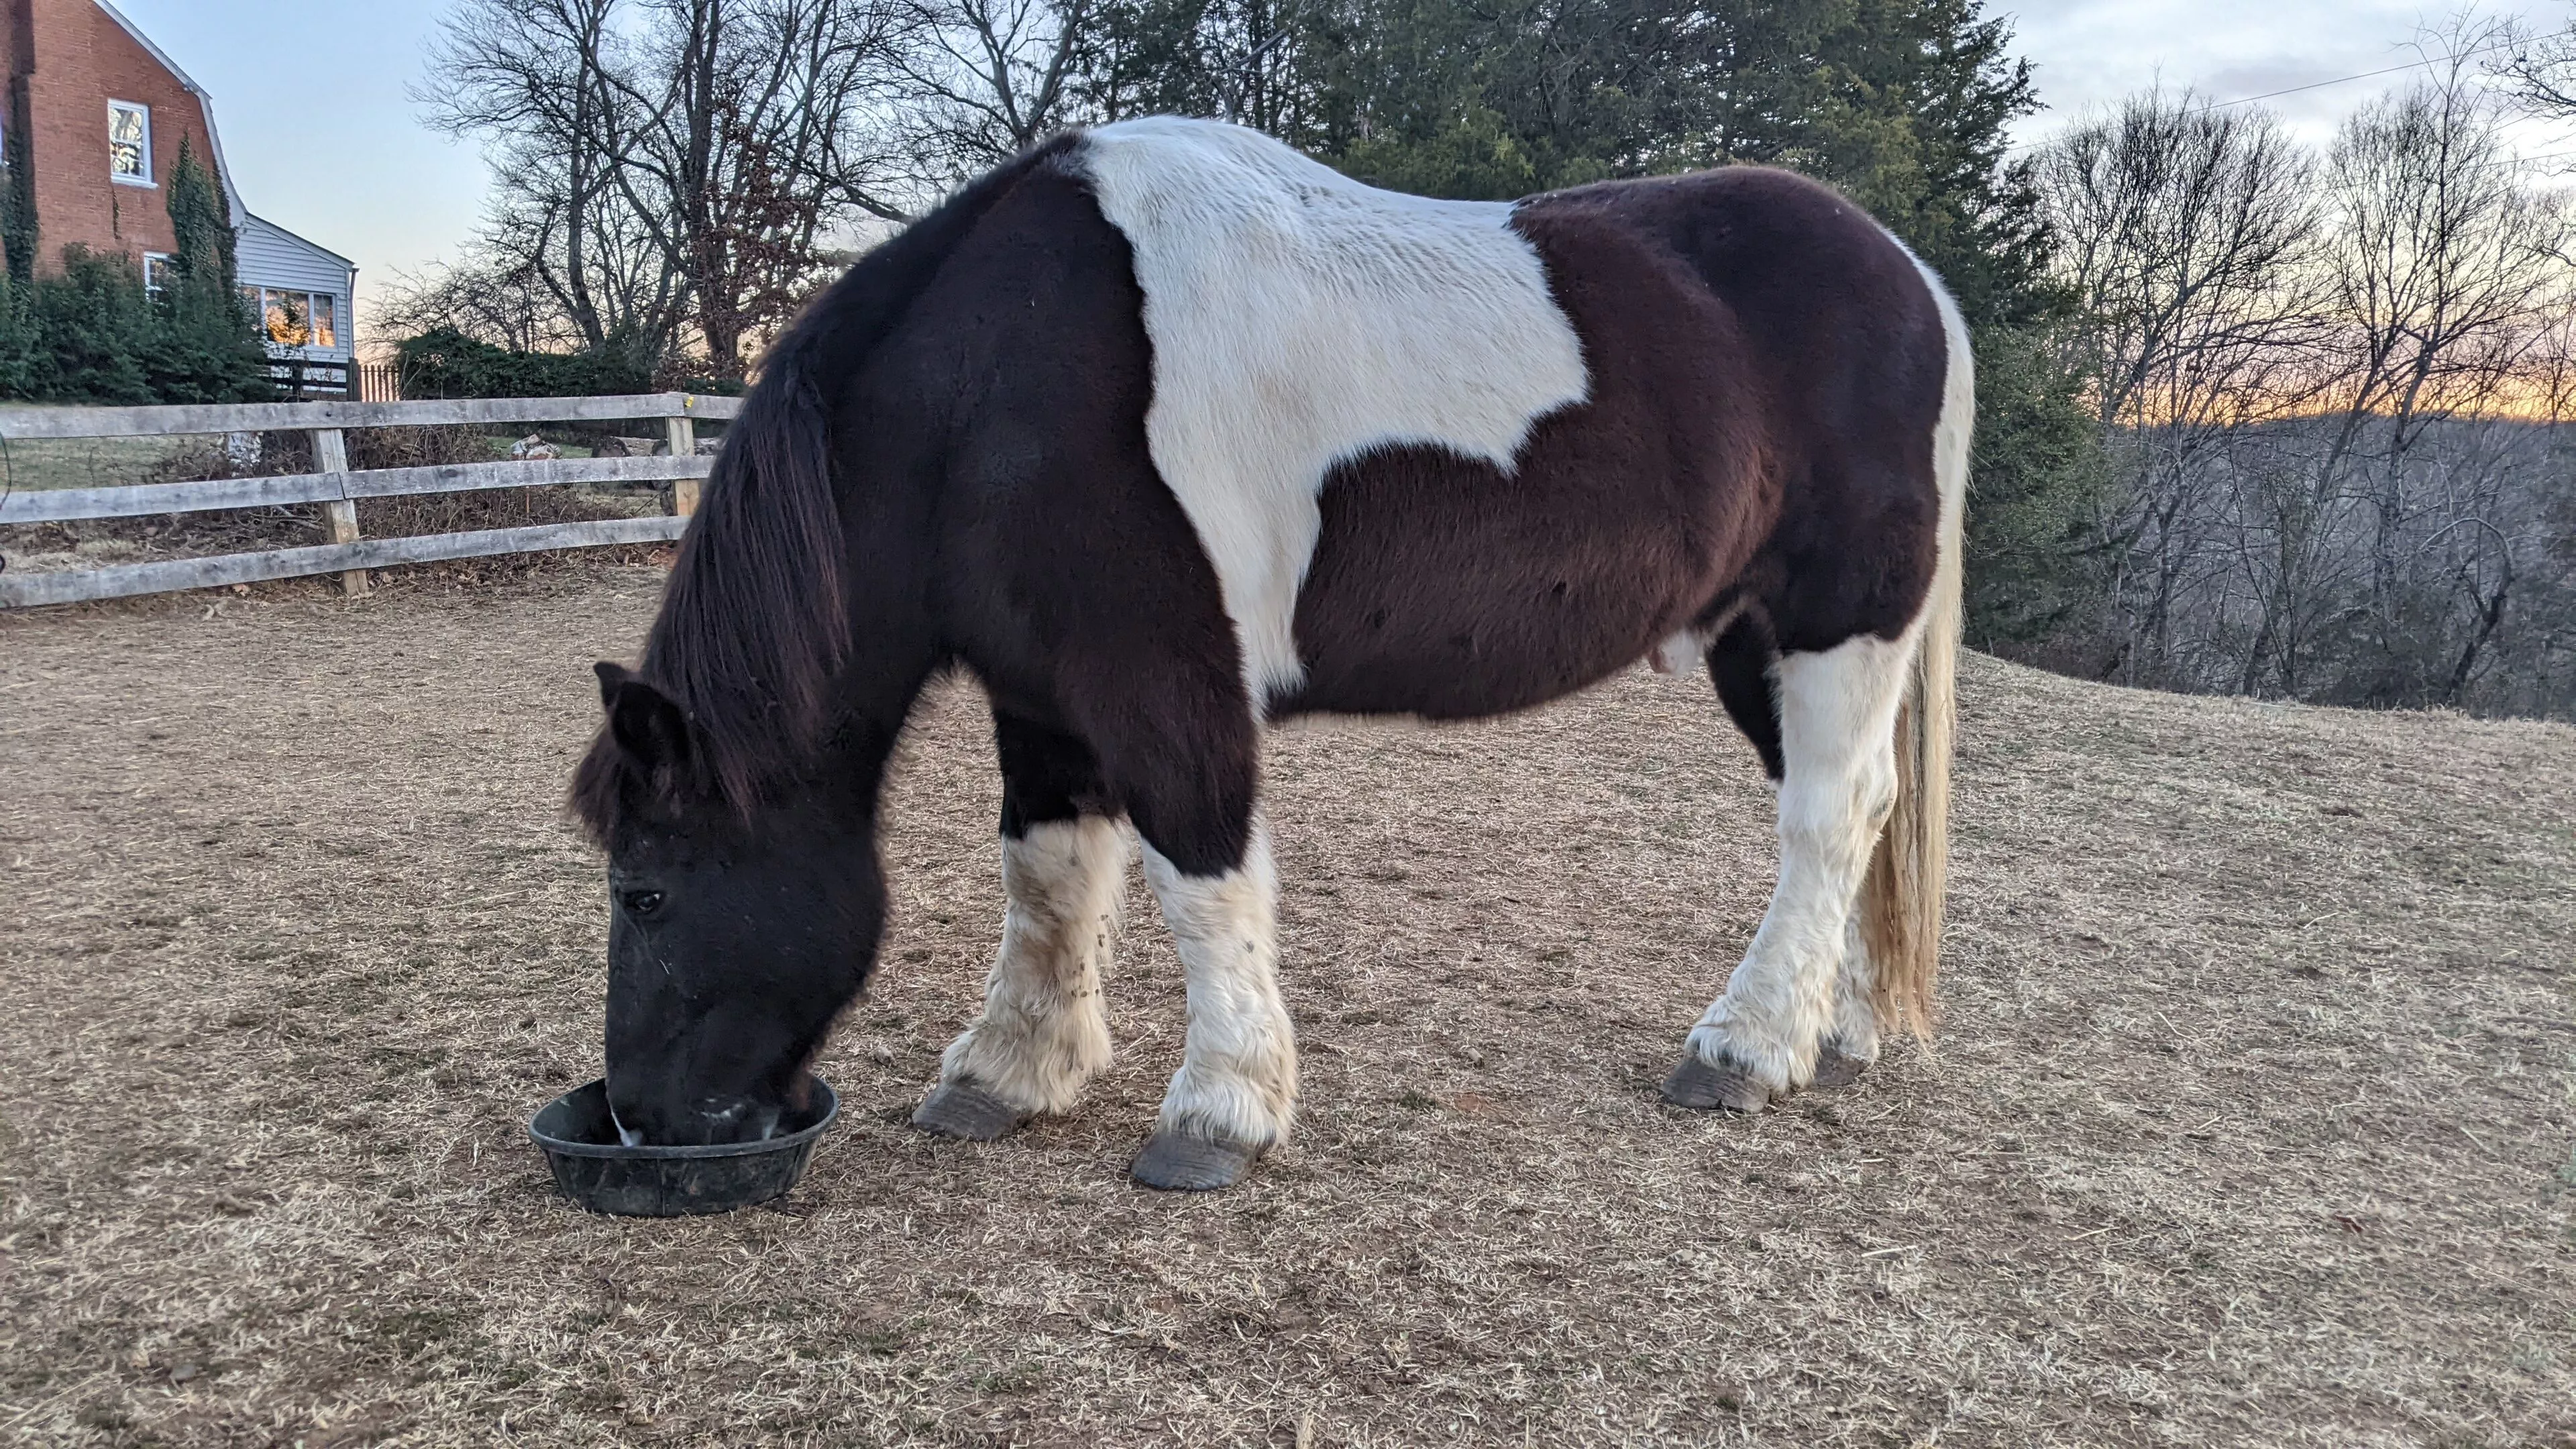 An image of a horse named Oreo eating from a feed tray